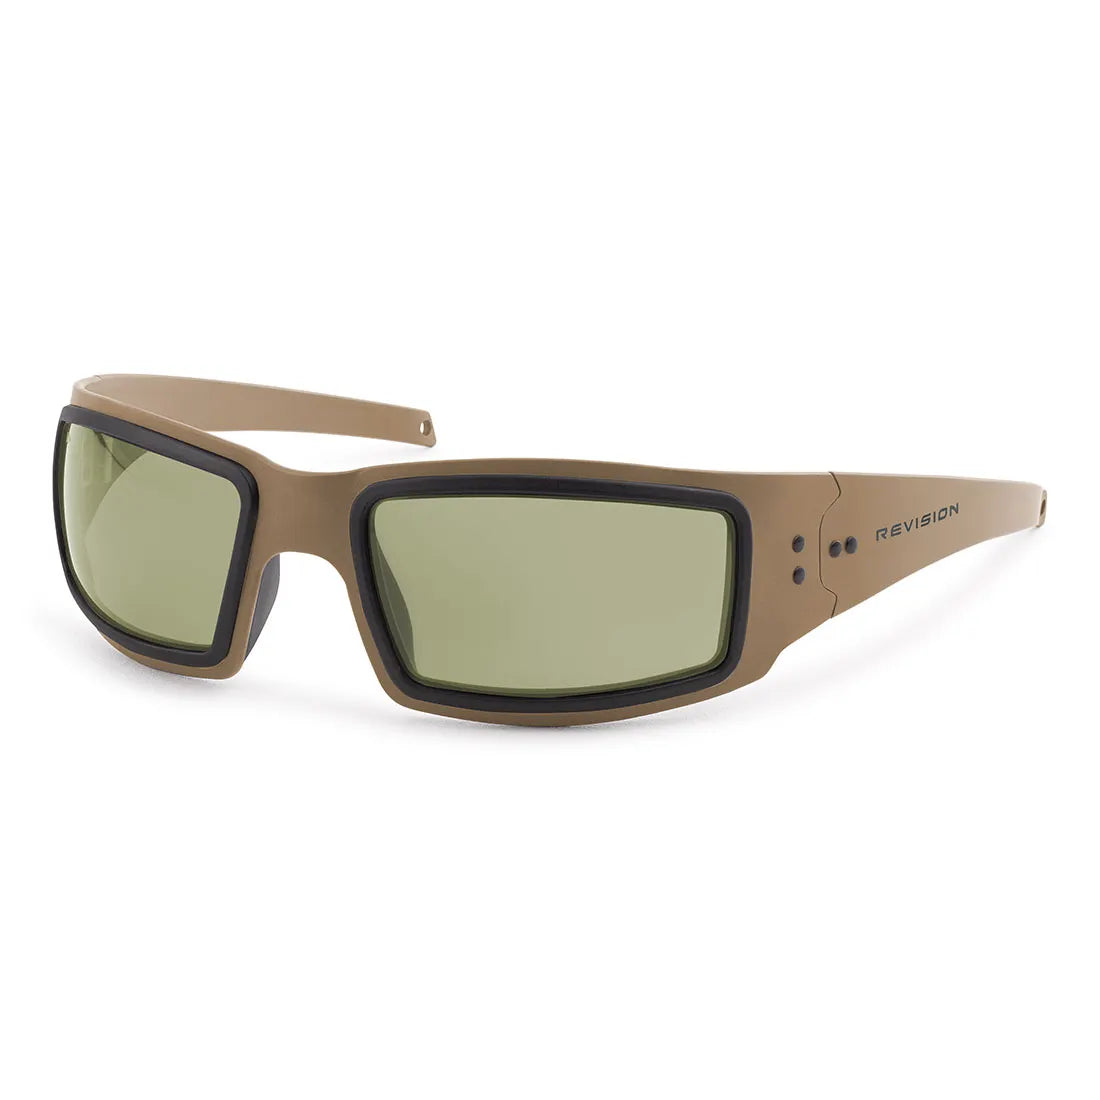 Revision Speed Demon Sunglasses Revision Military Cano Lens / Coyote Brown Frame 